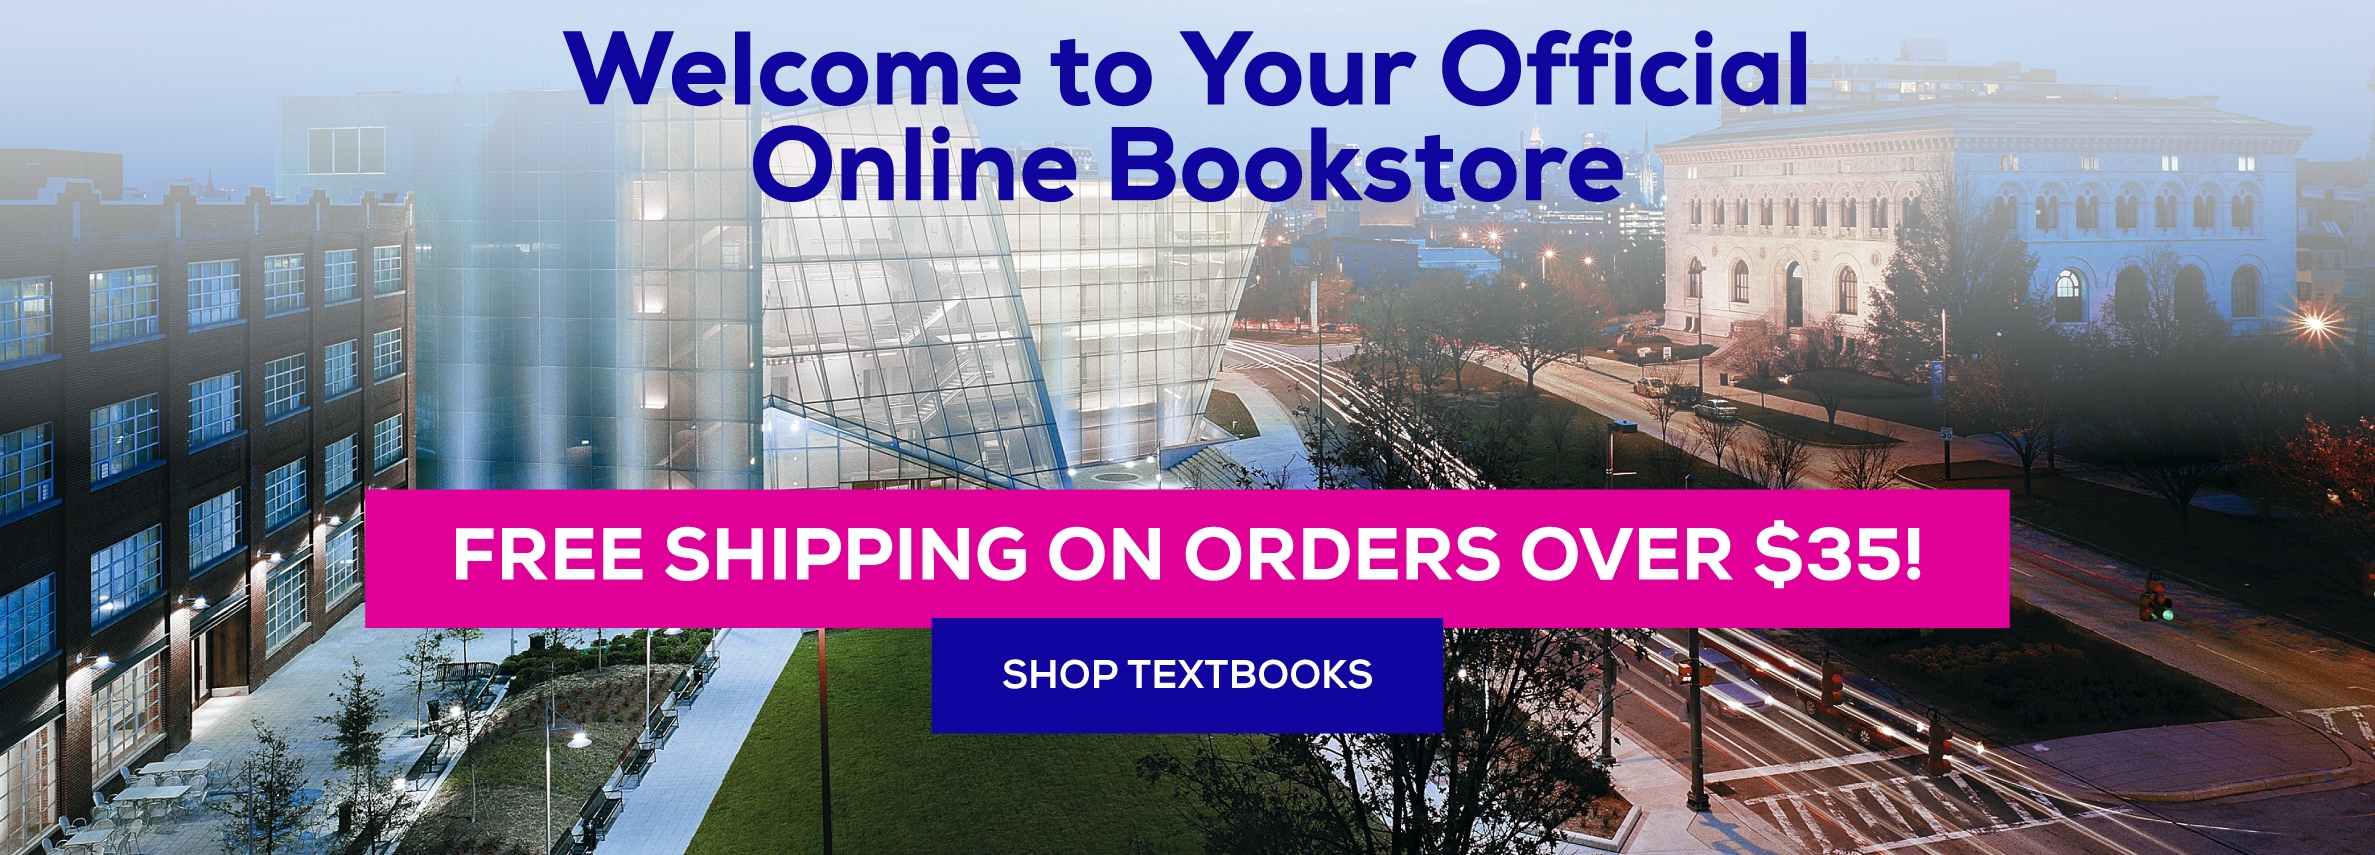 Welcome to Your Online Bookstore